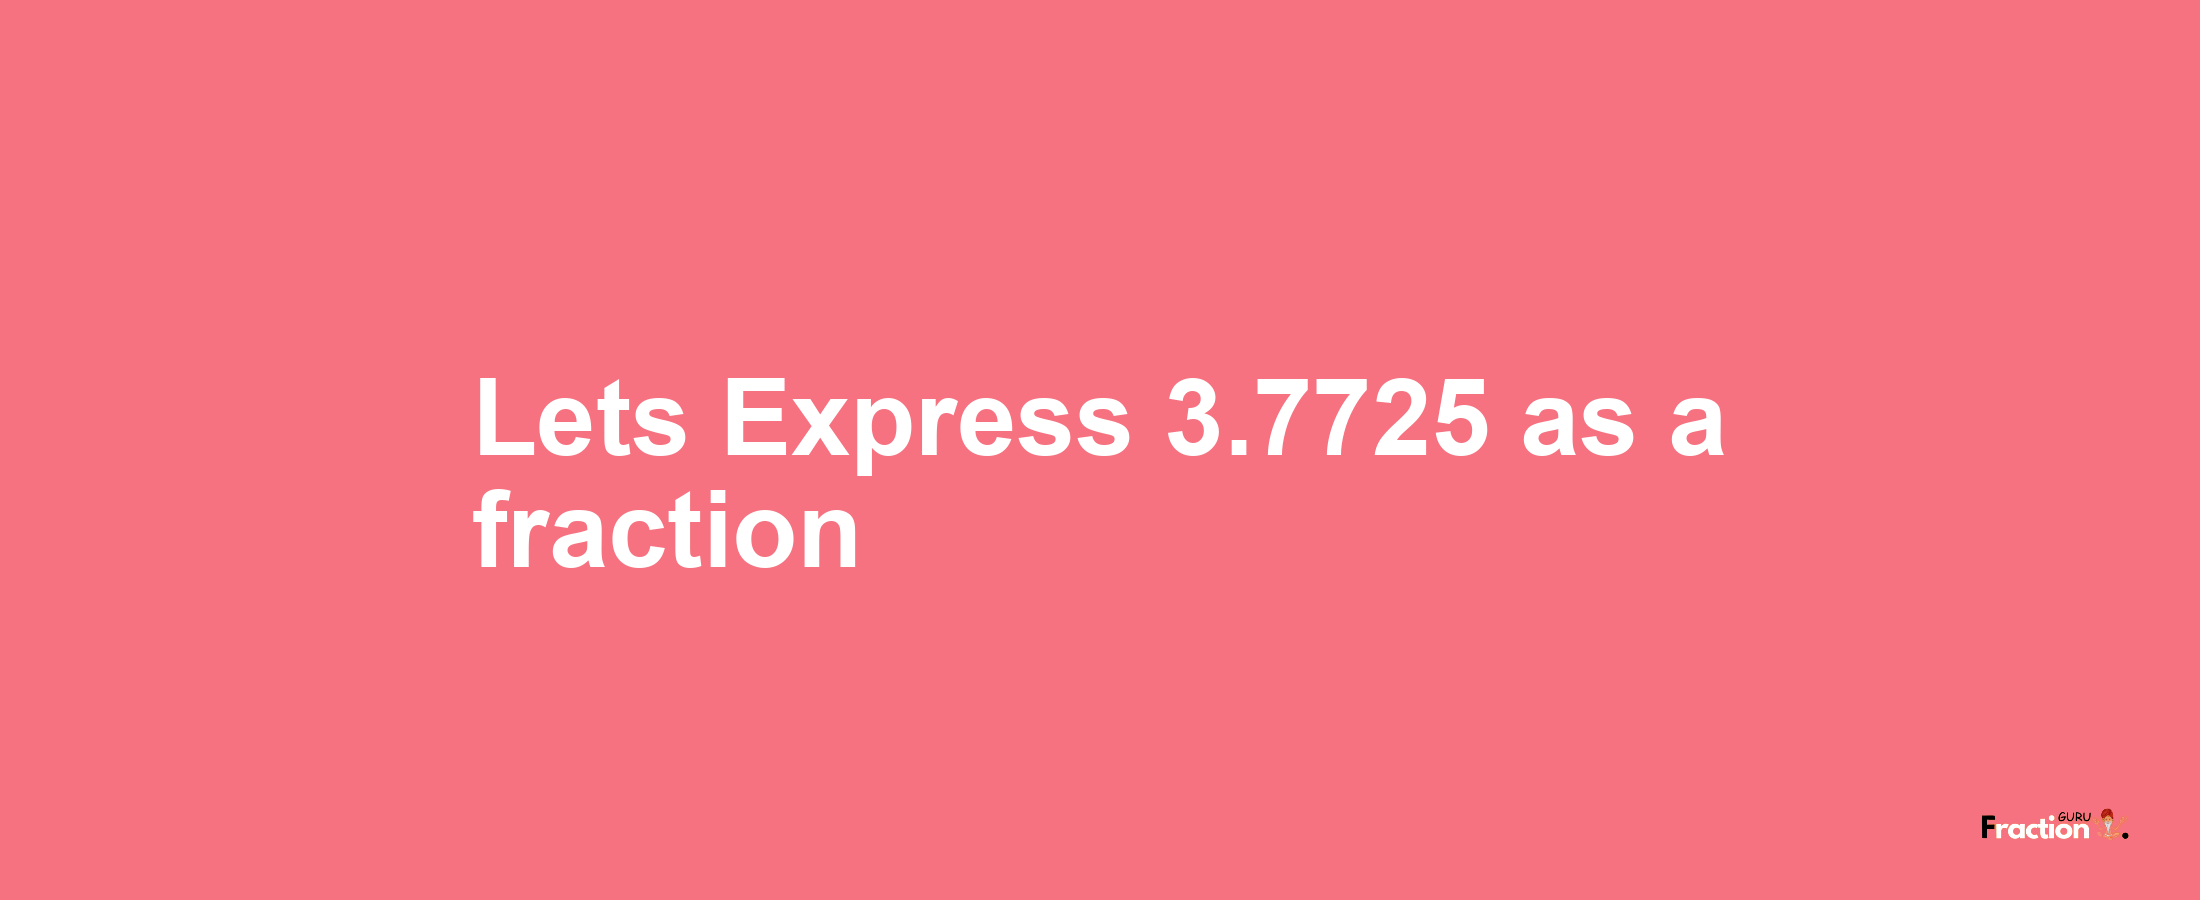 Lets Express 3.7725 as afraction